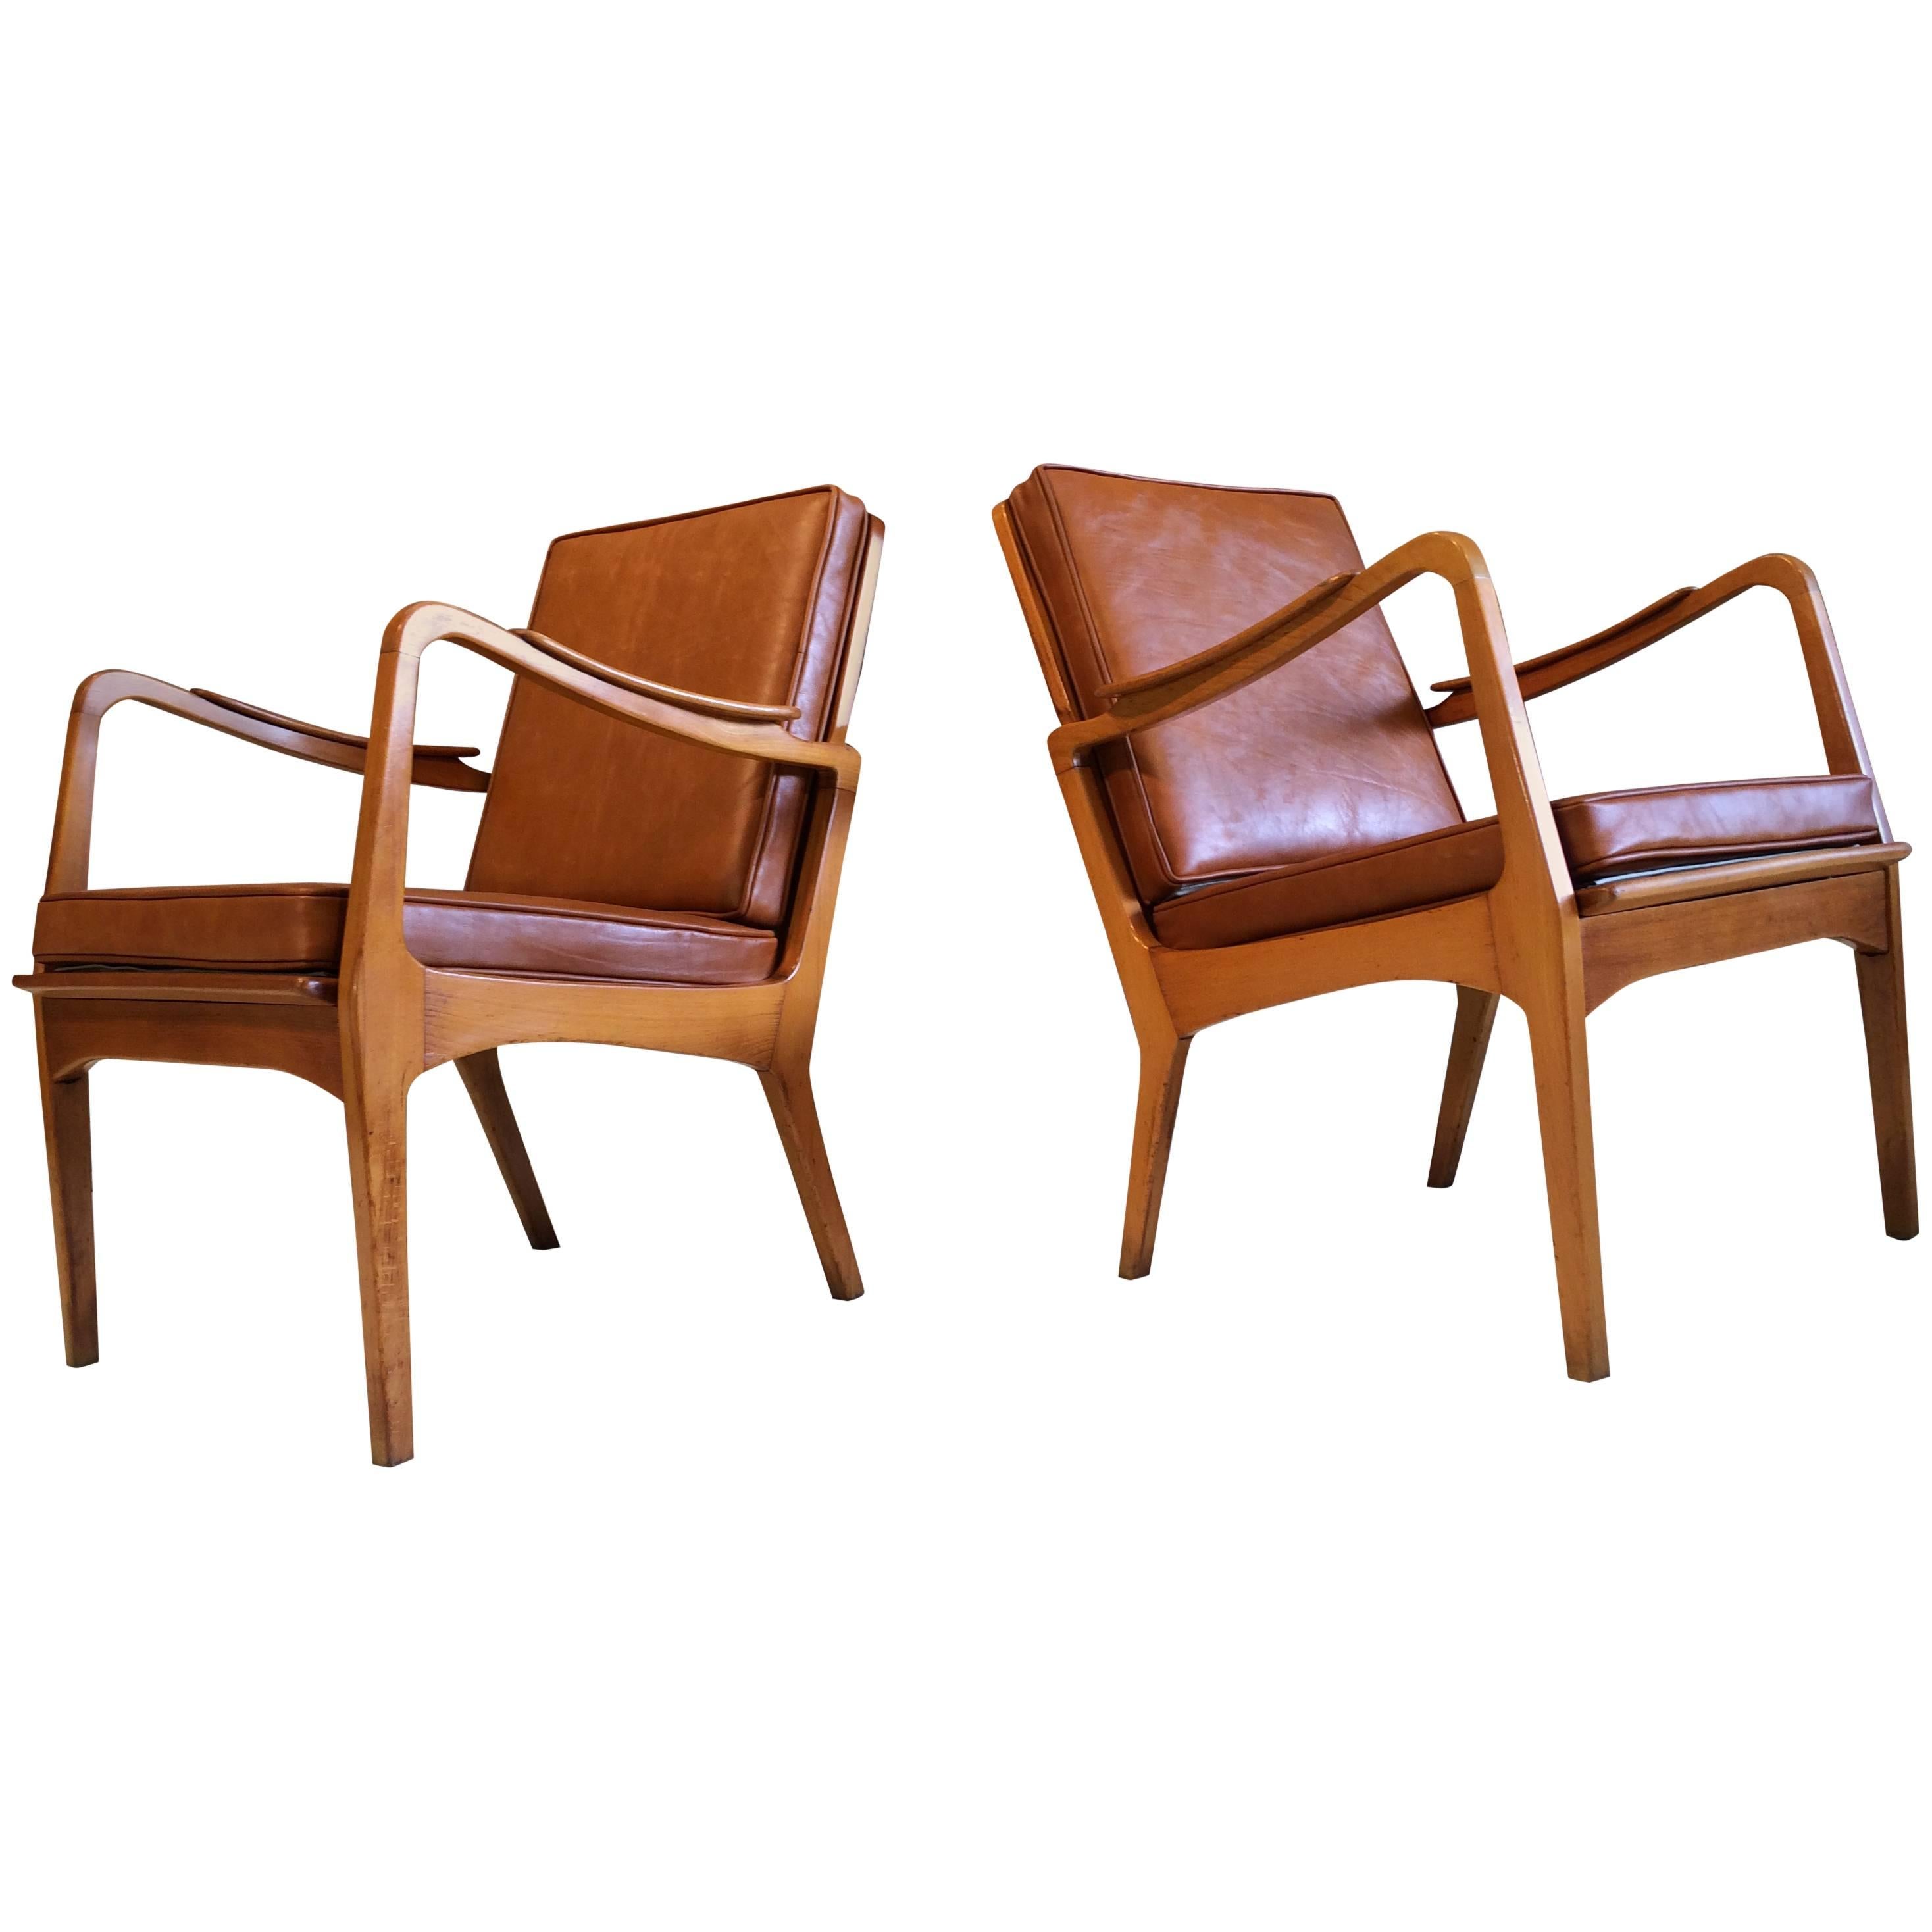 Beautiful Pair of Danish Armchairs, Denmark, 1950s Birch and Cognac Leather